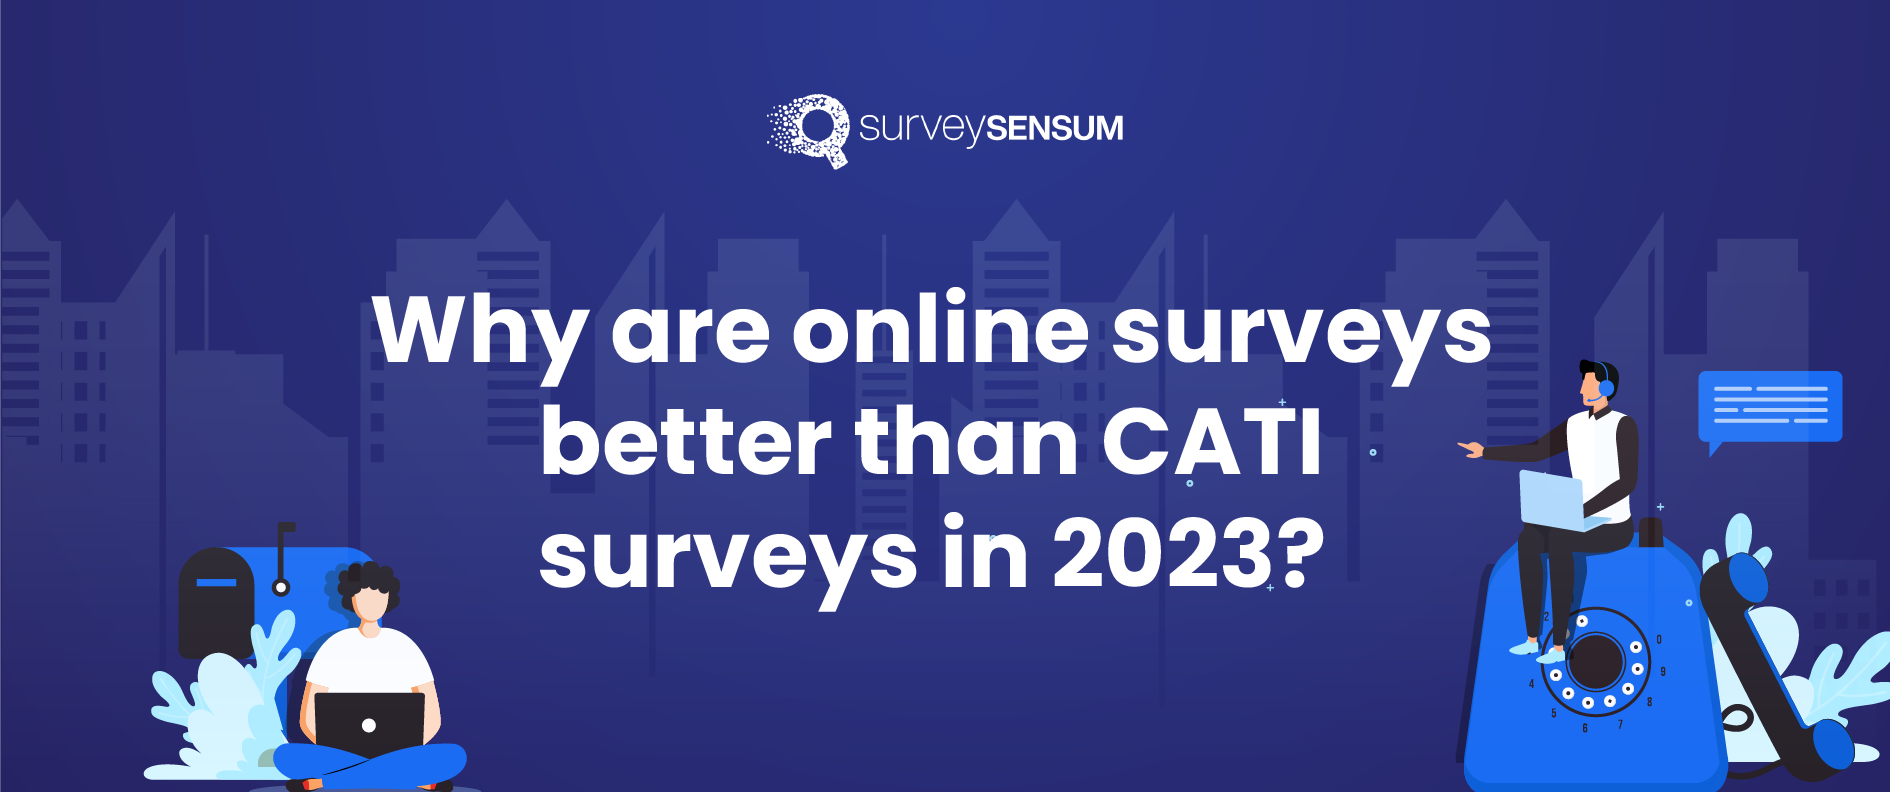 Why are online surveys better than CATI surveys in 2023?